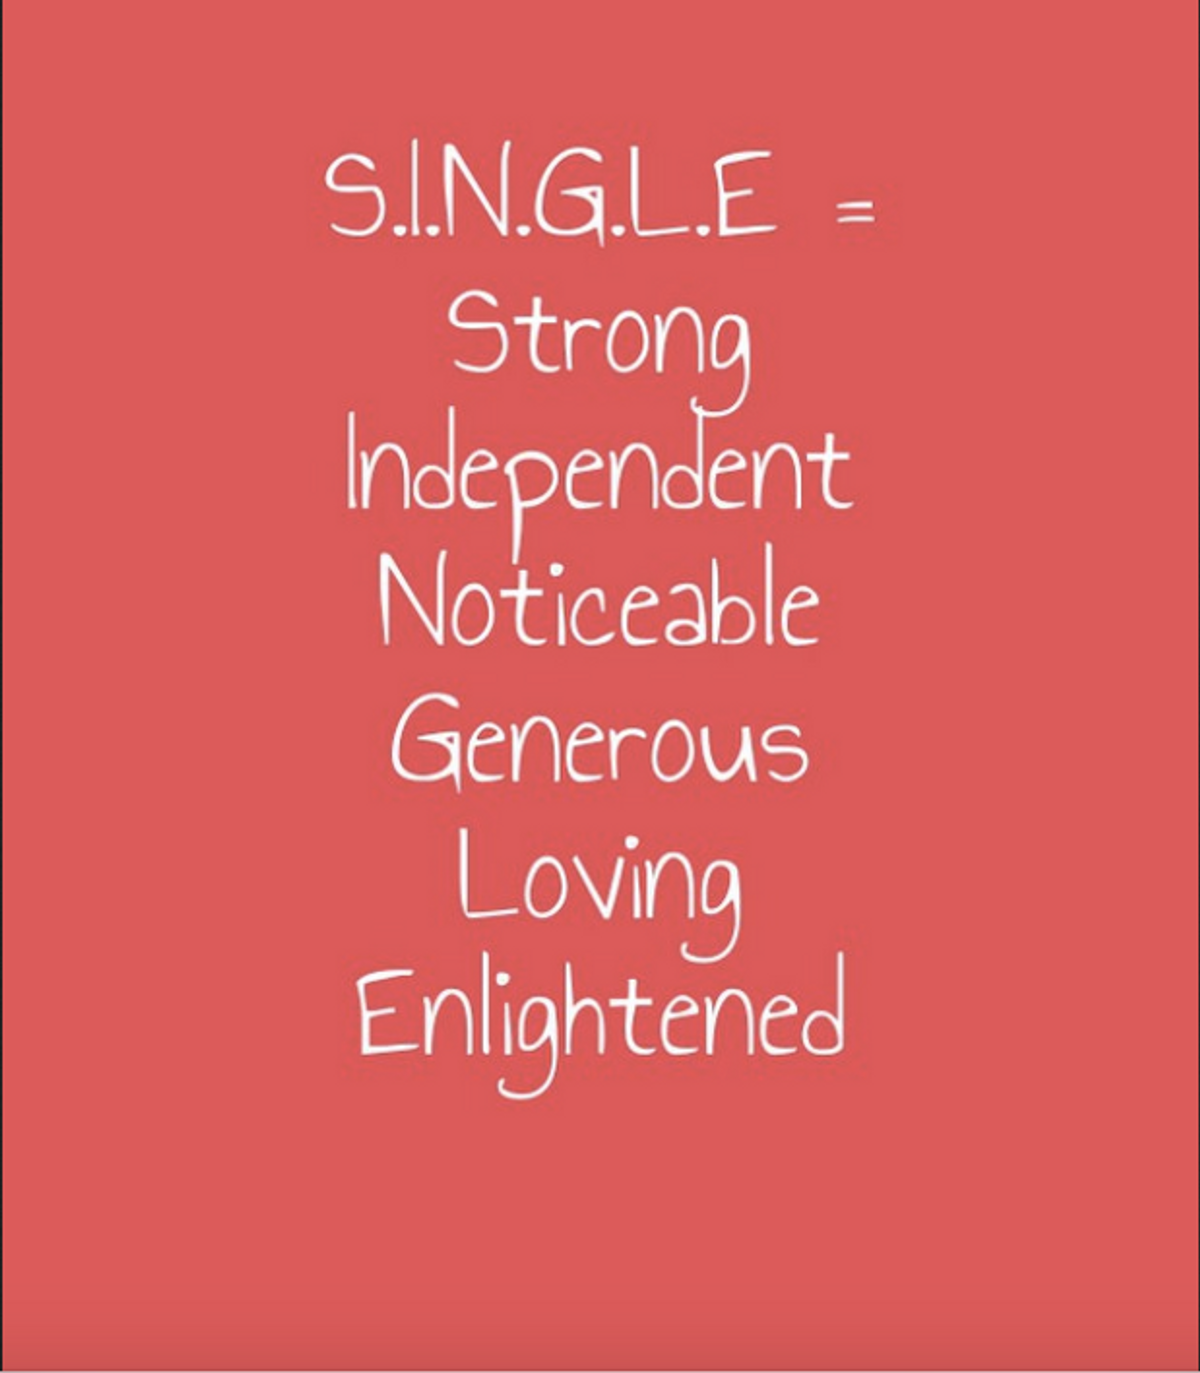 The Perks of Being Single